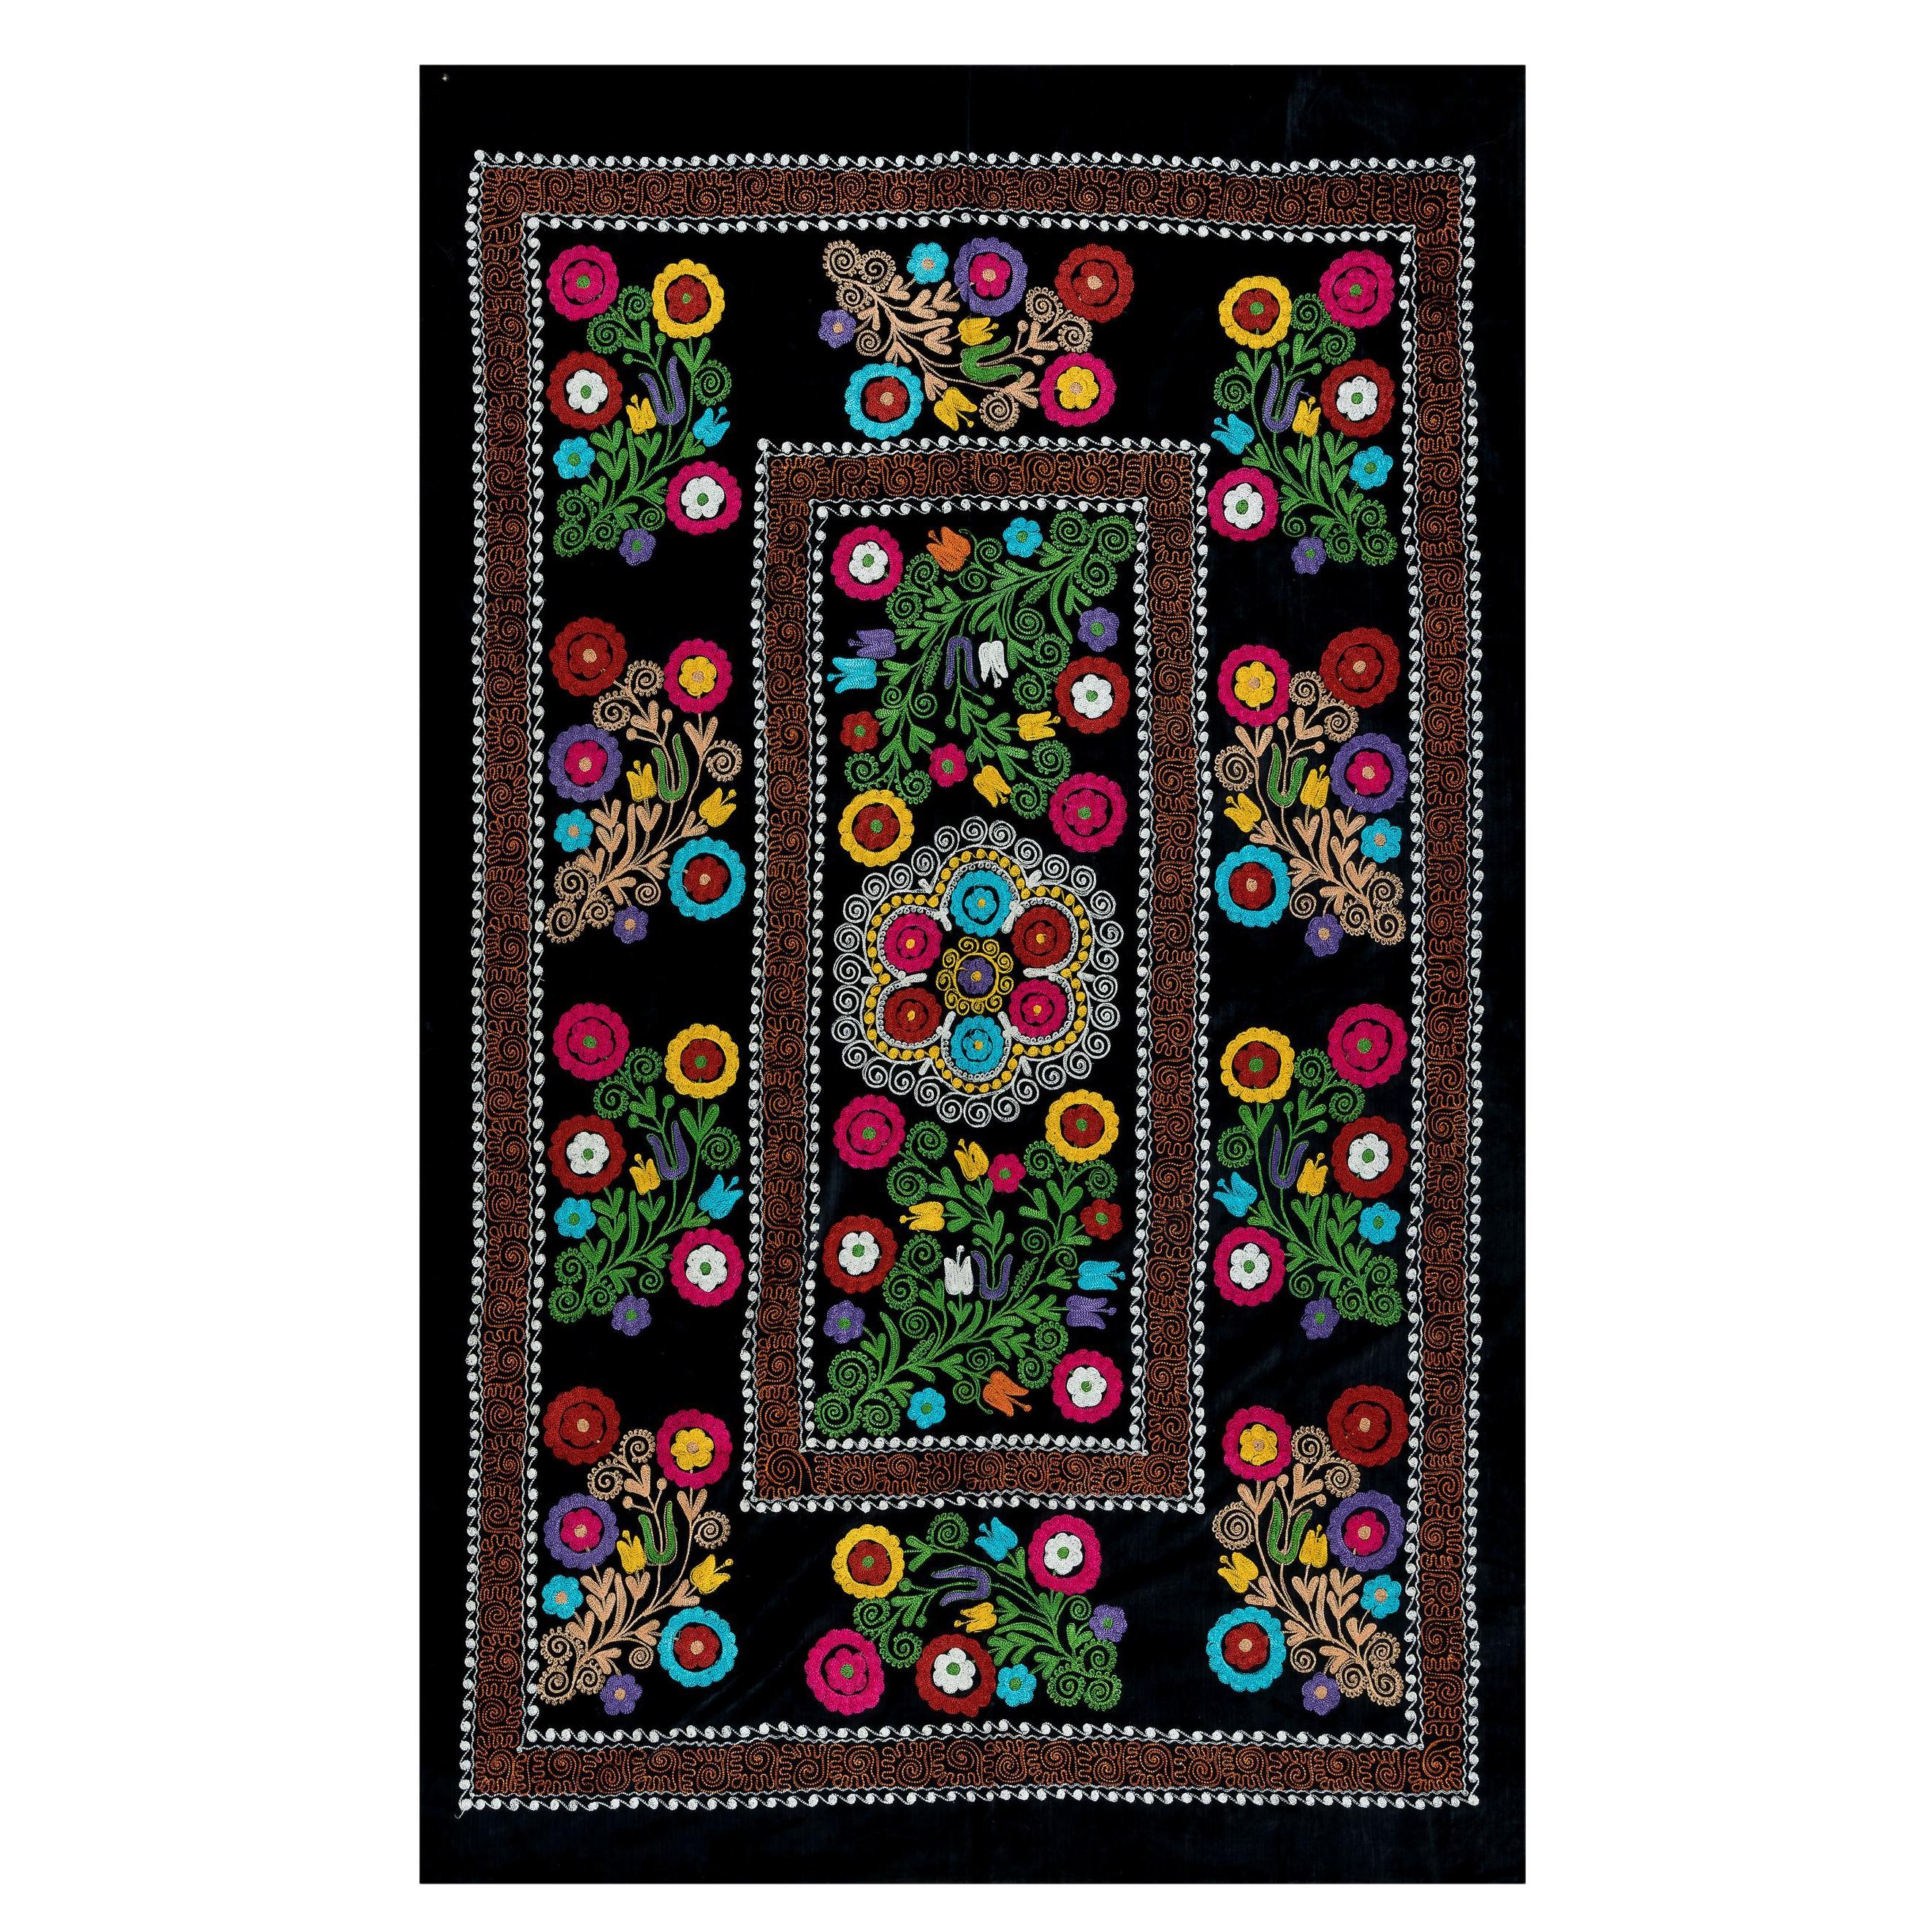 4.3x6.8 Ft Silk Hand Embroidery Bed Cover, Asian Suzani Wall Hanging in Black